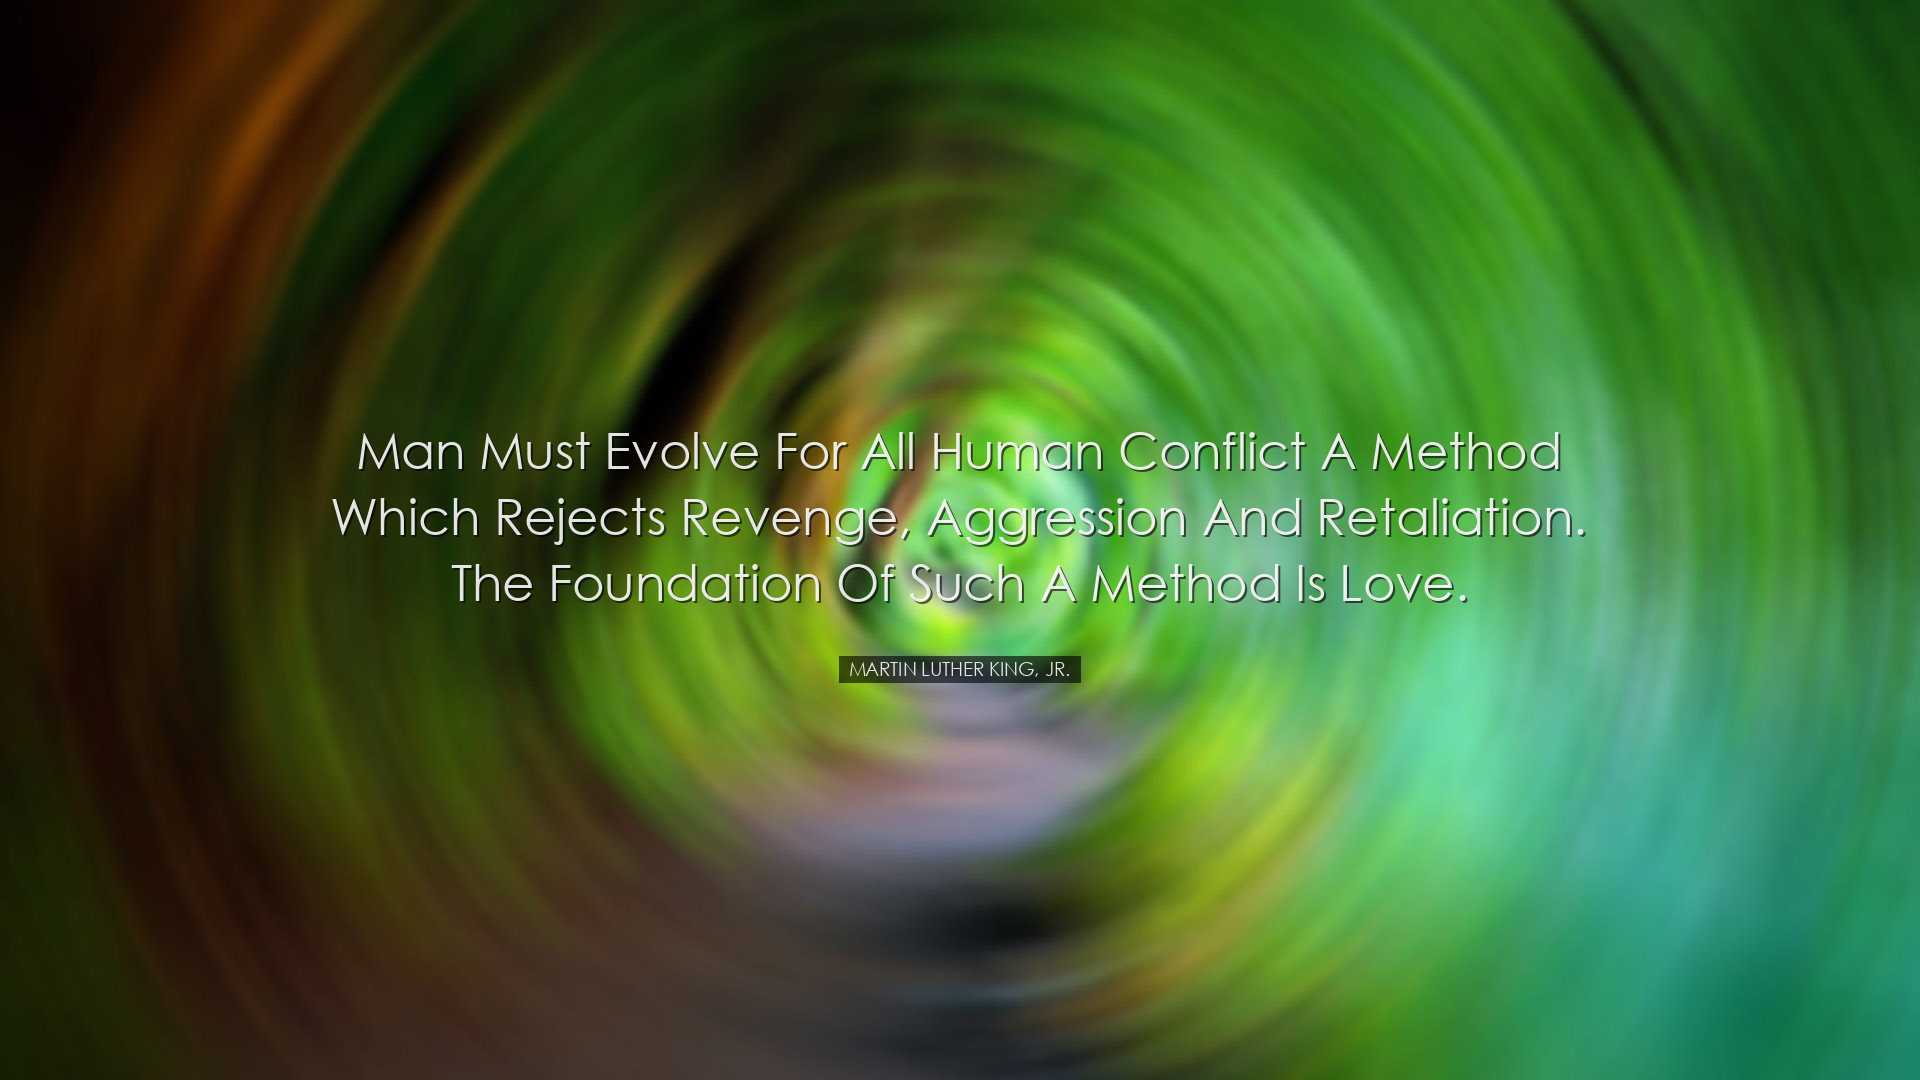 Man must evolve for all human conflict a method which rejects reve